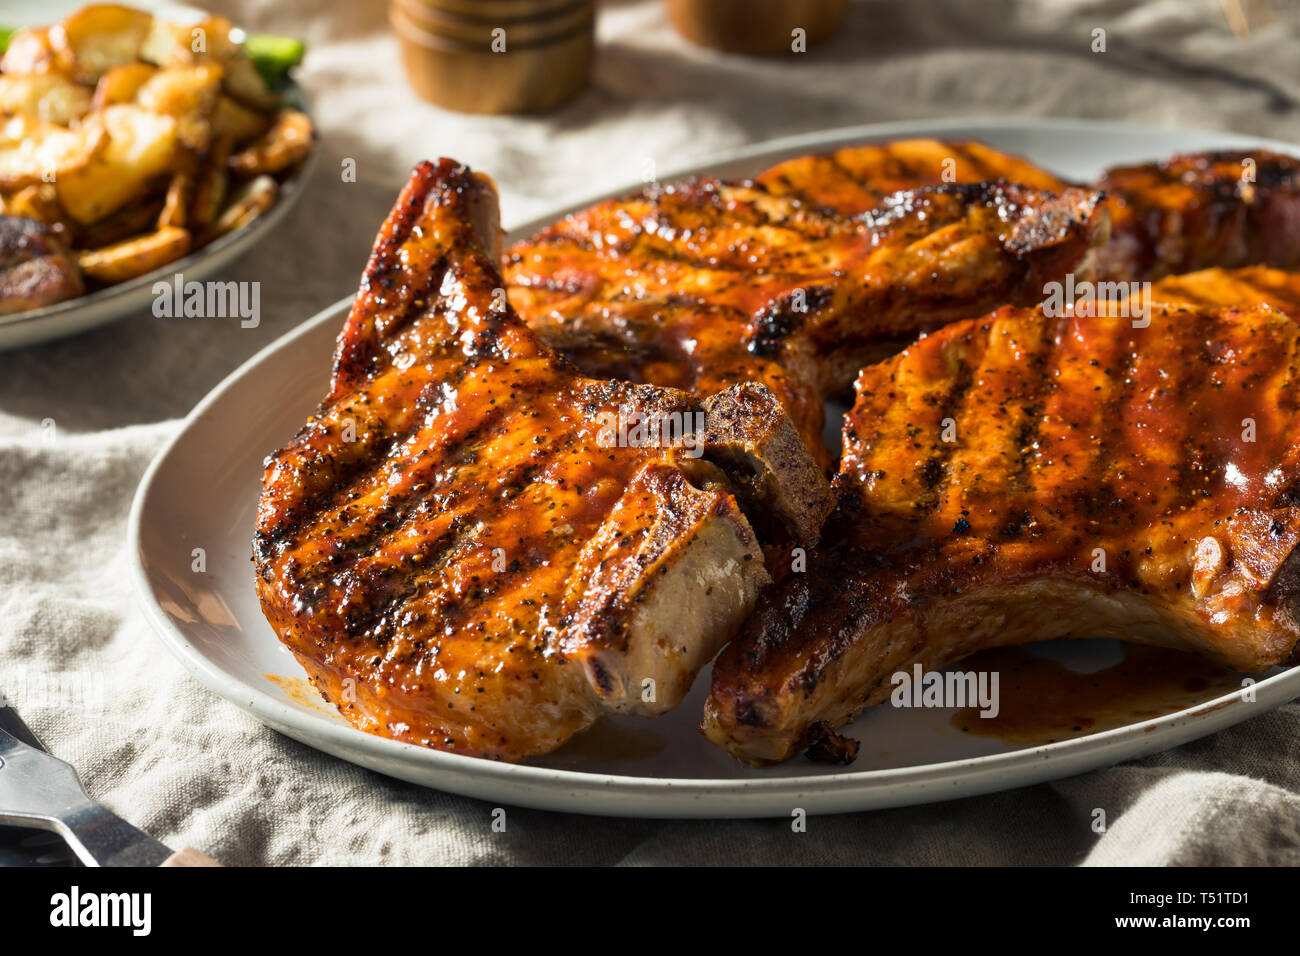 Homemade Barbecue Pork Chops Ready to Eat Stock Photo